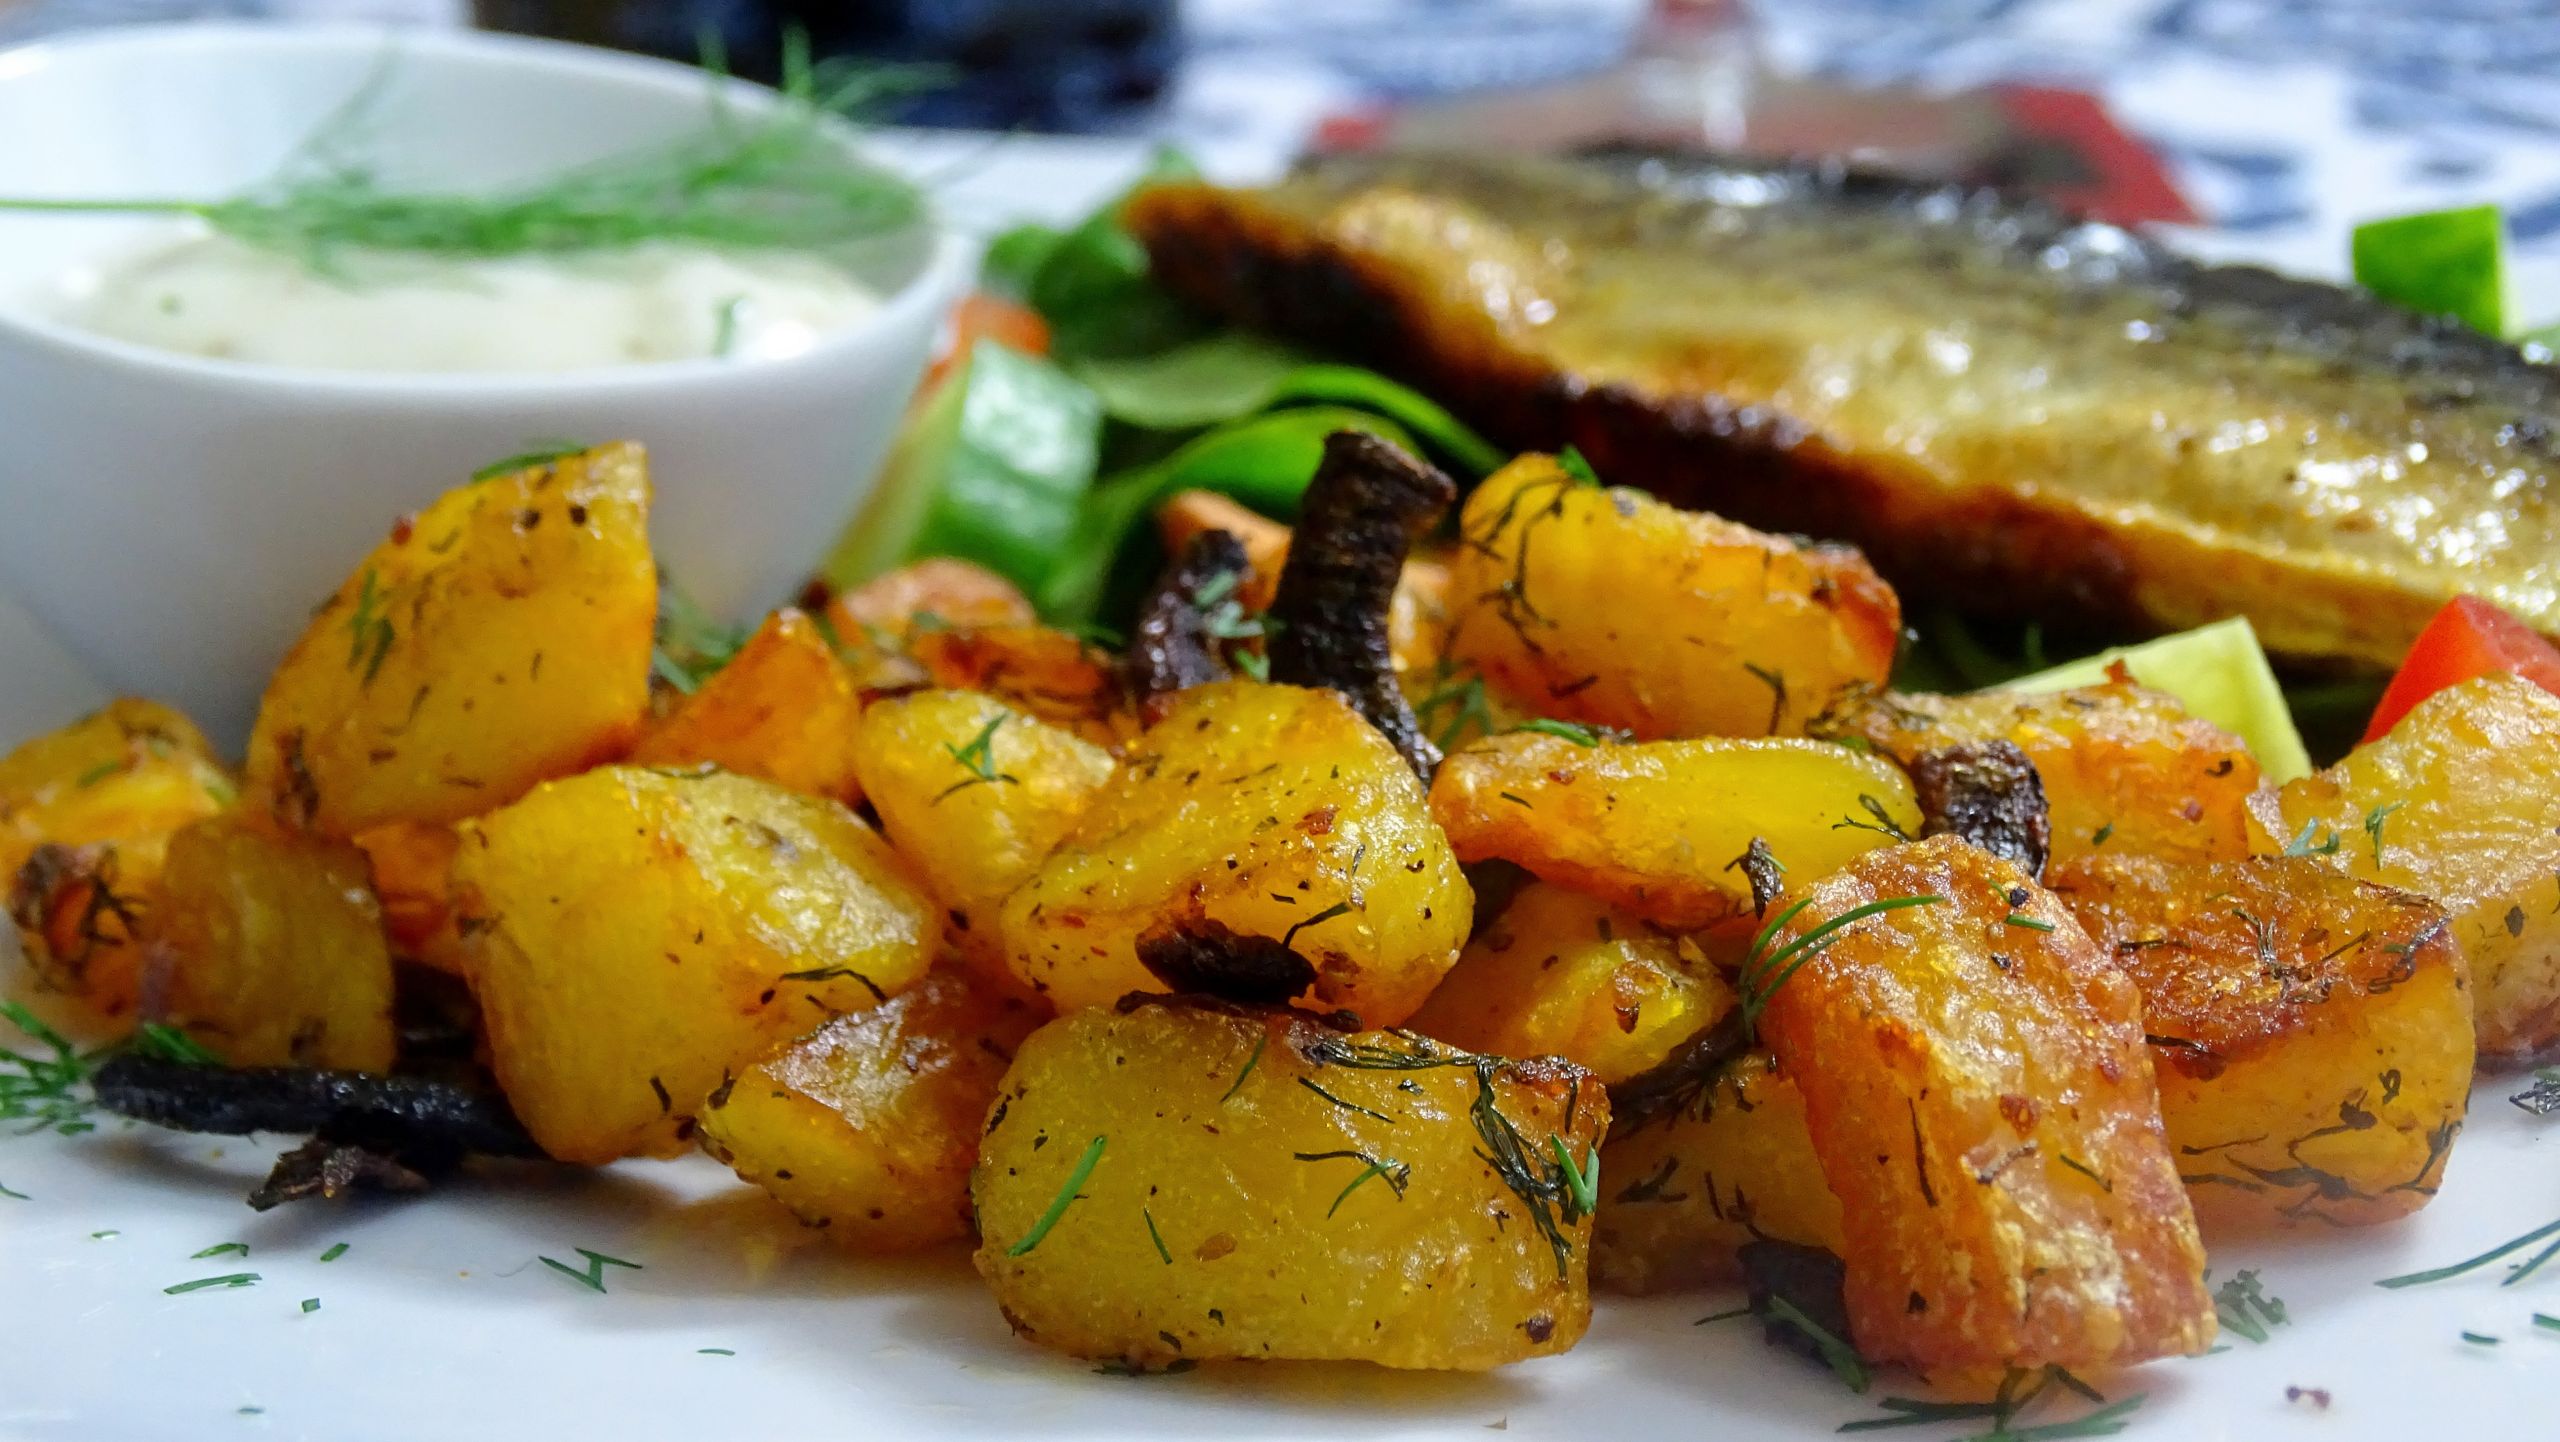 Potato Side Dishes For Fish
 Crispy Potatoes with Dill perfect side dish for fish